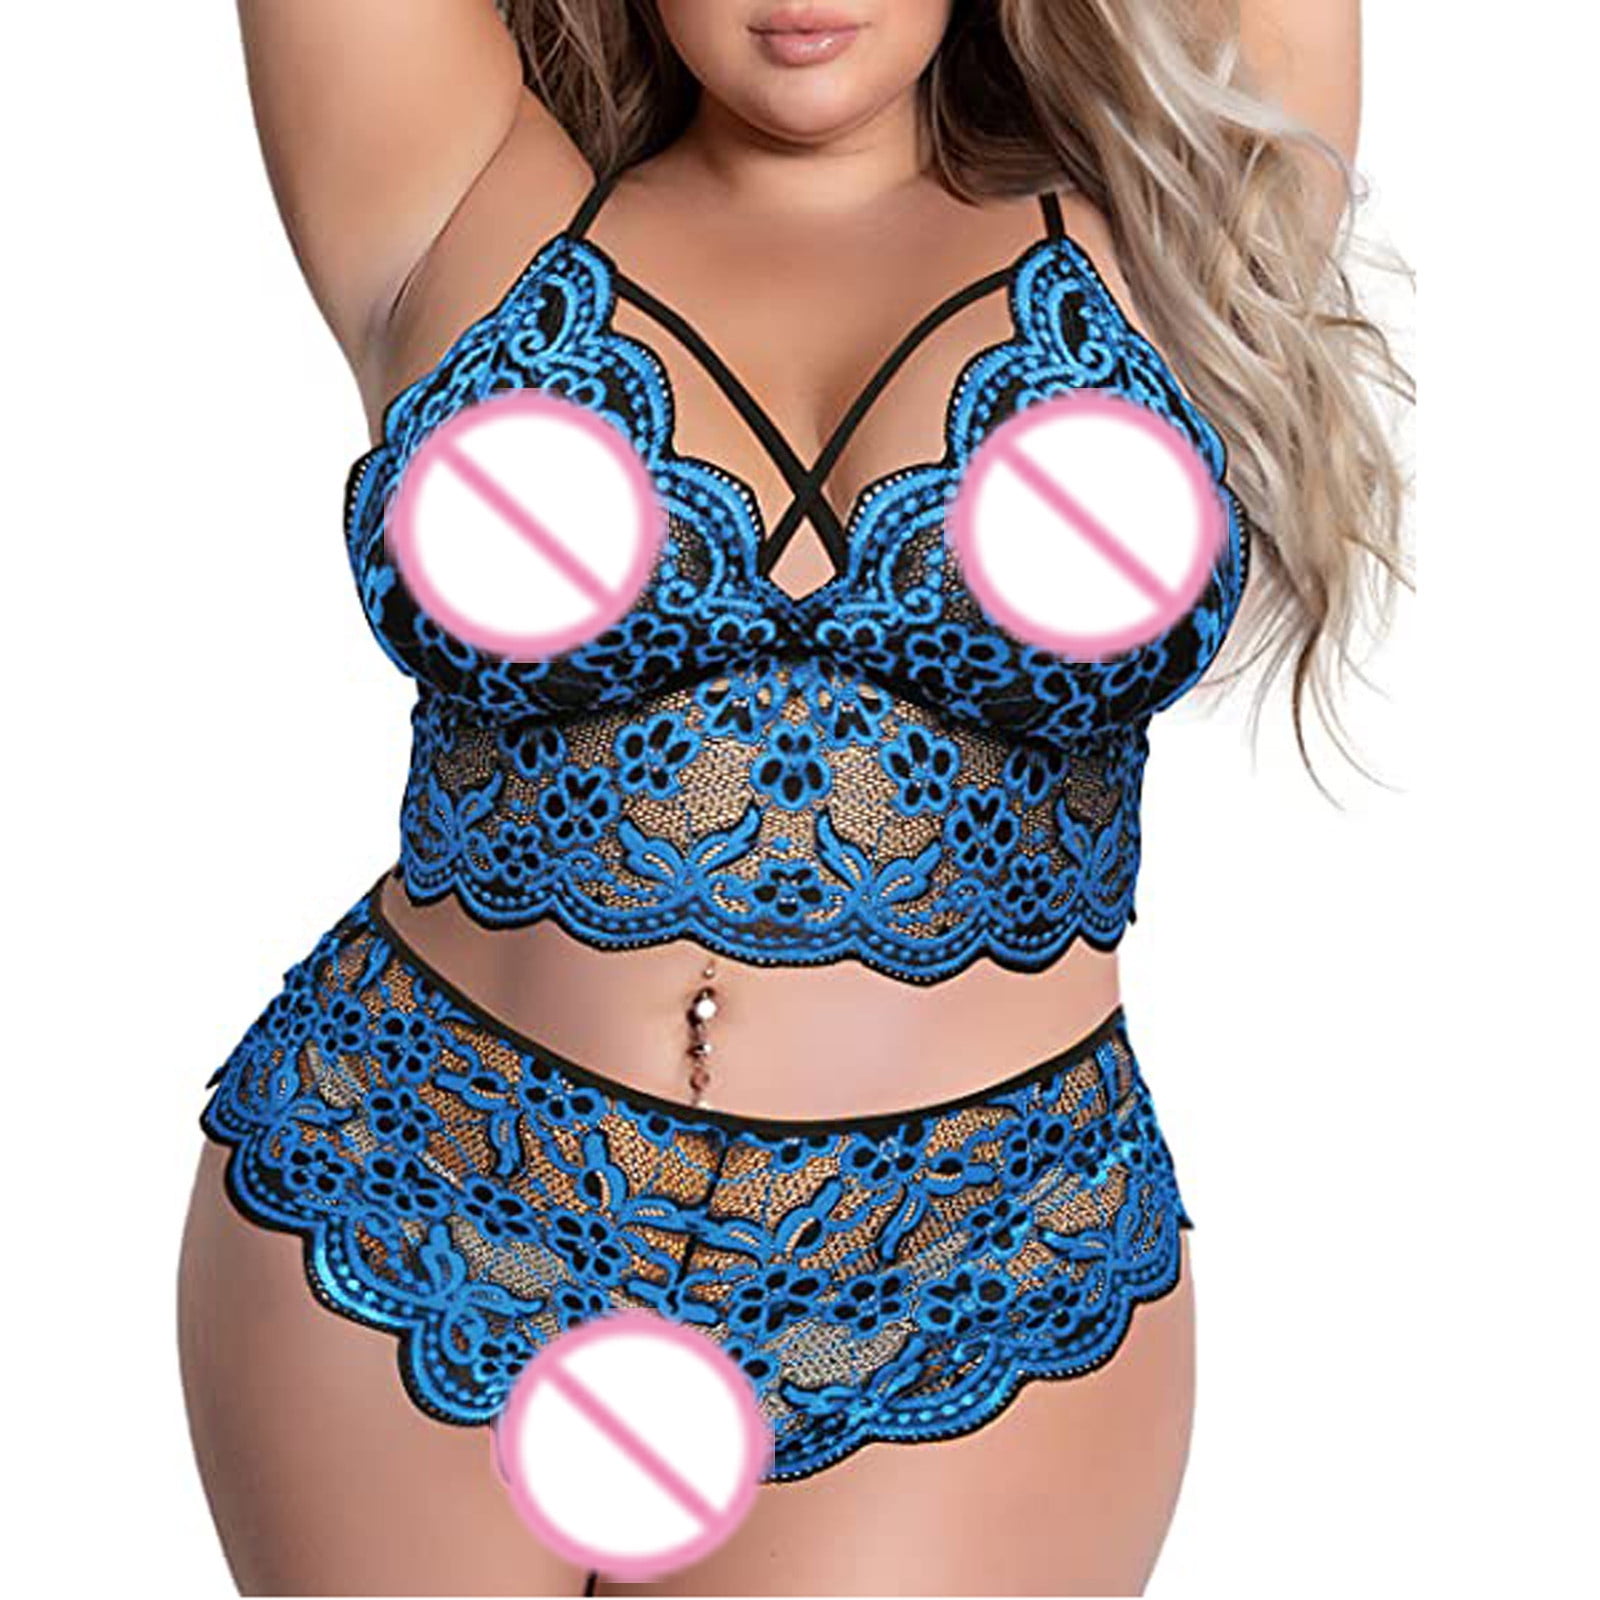 BDDVIQNN Bra And Panty Sets For Women Lingerie Plus Size Sexy Lingerie V Neck High Waist Floral Criss Cross Bra And Panty Piece Set No Underwire - Walmart.com